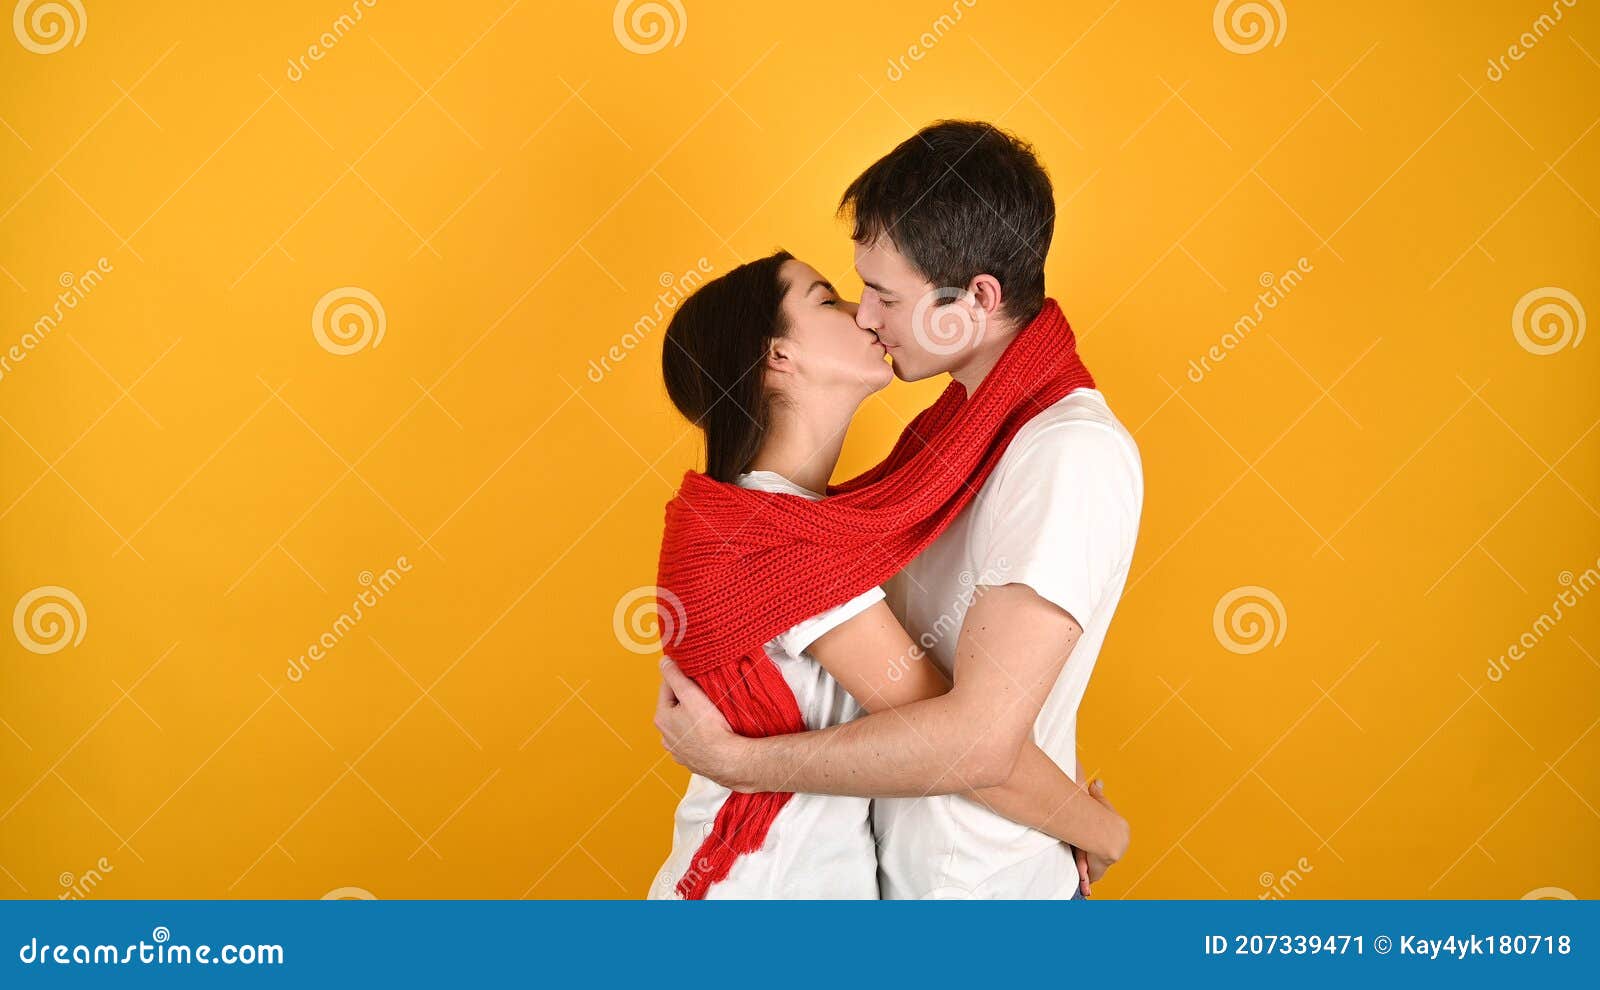 Kissing Young Couple On A Yellow Background Stock Image Image Of Human Indoor 207339471 